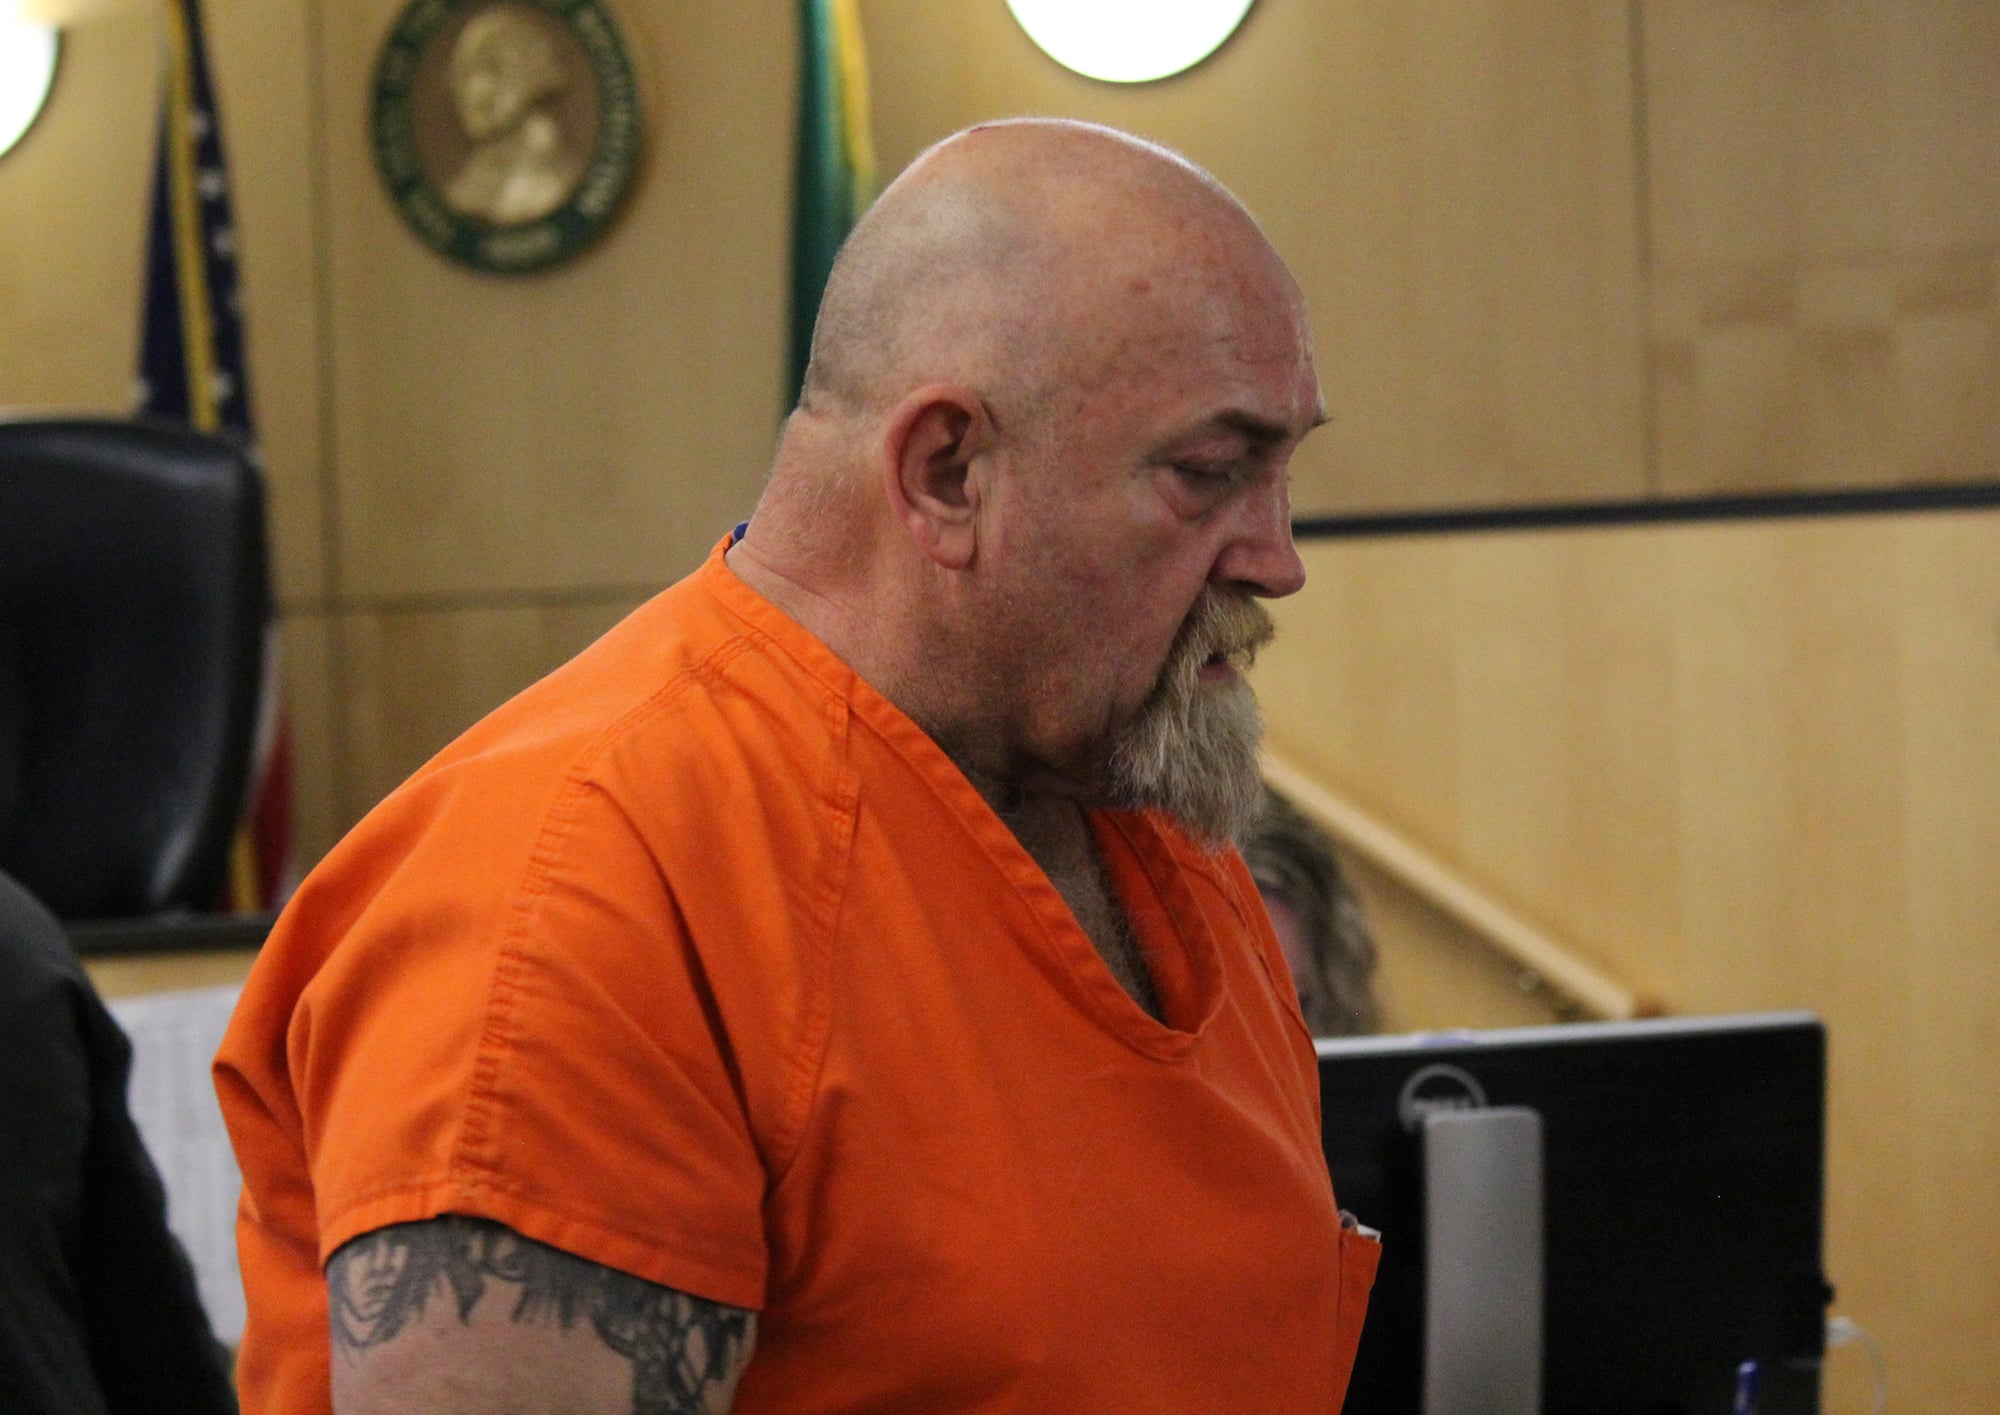 Michael Evan Ross-Morales appeared in Clark County Superior Court in May 2019 to face several charges, including vehicular homicide.